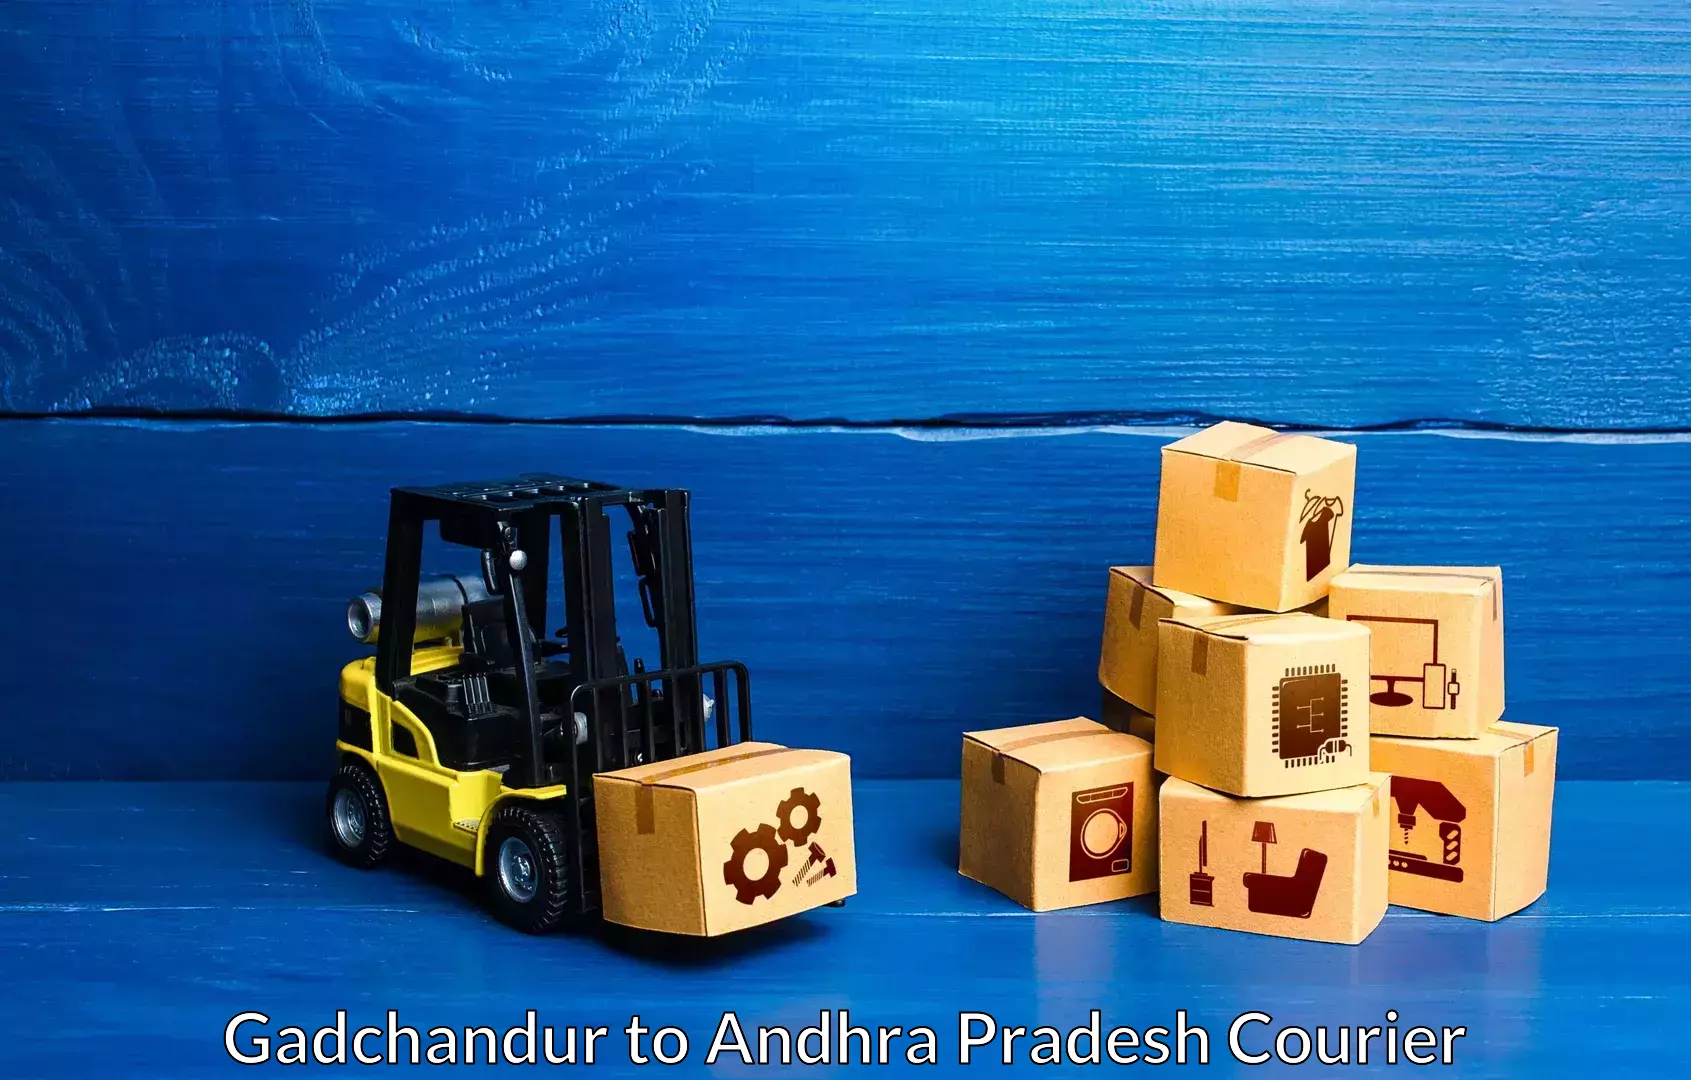 Professional movers and packers Gadchandur to Tirupati